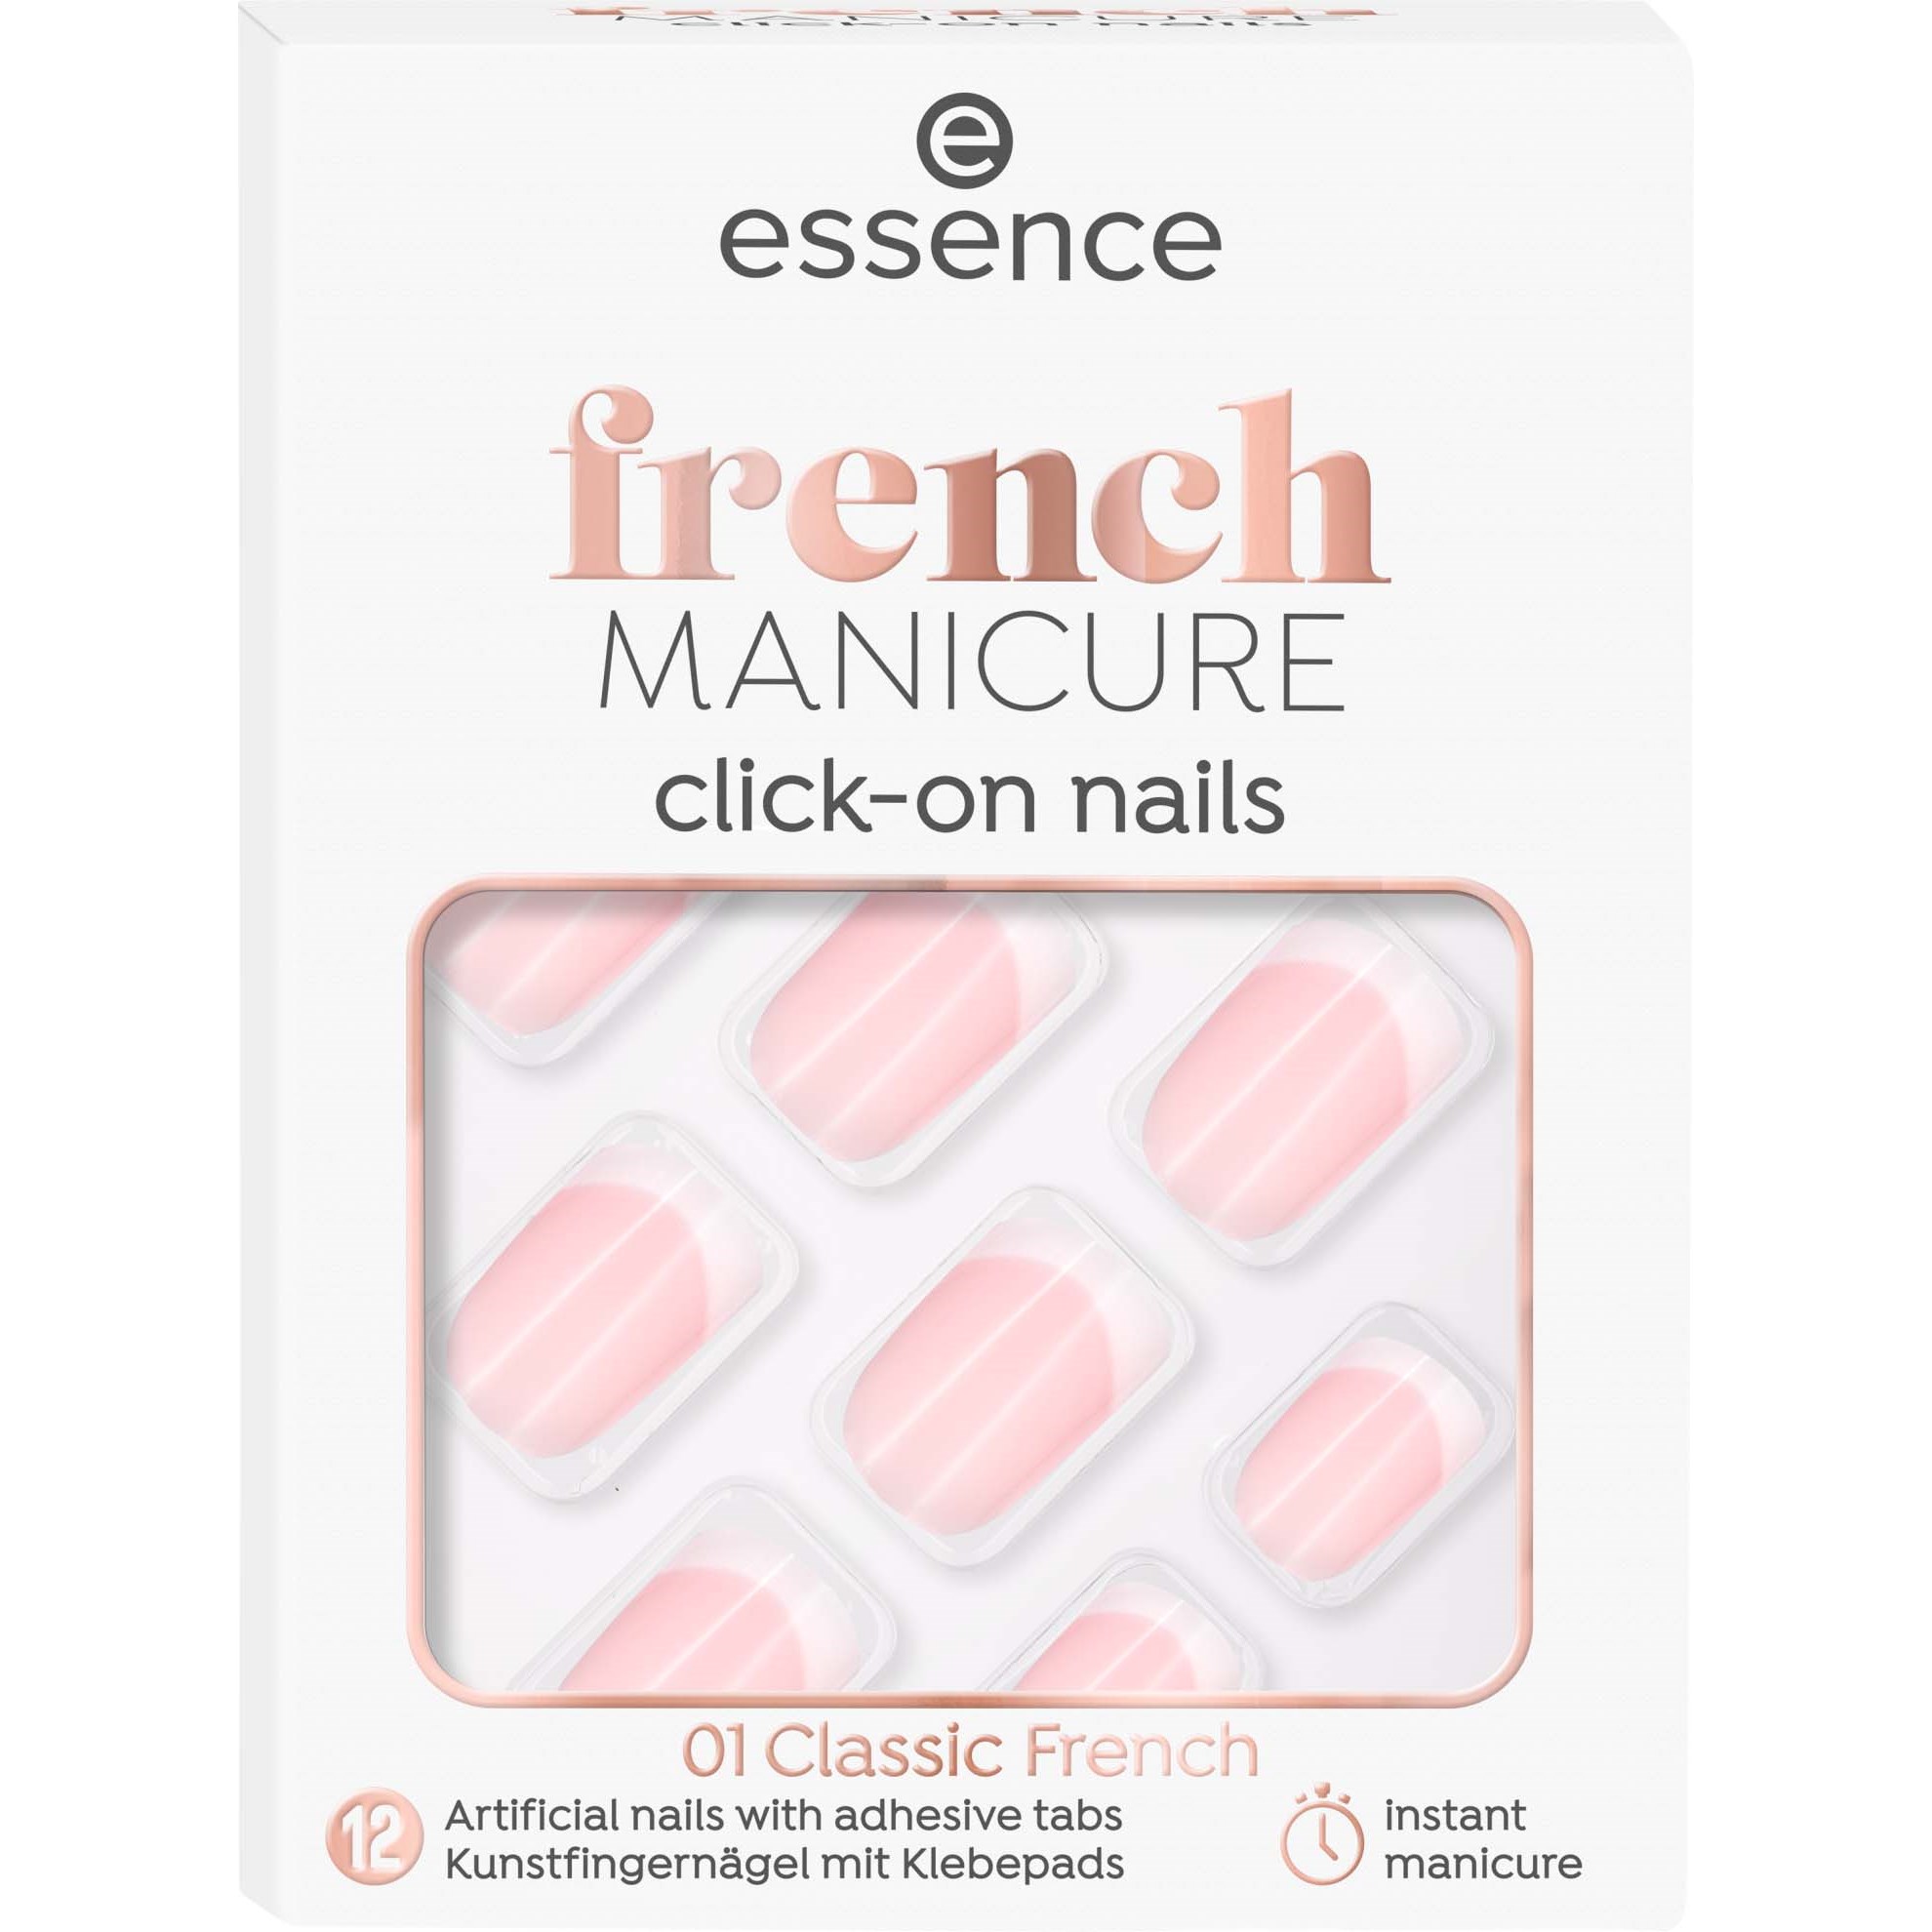 Läs mer om essence French Manicure Click-on Nails 01 Classic French